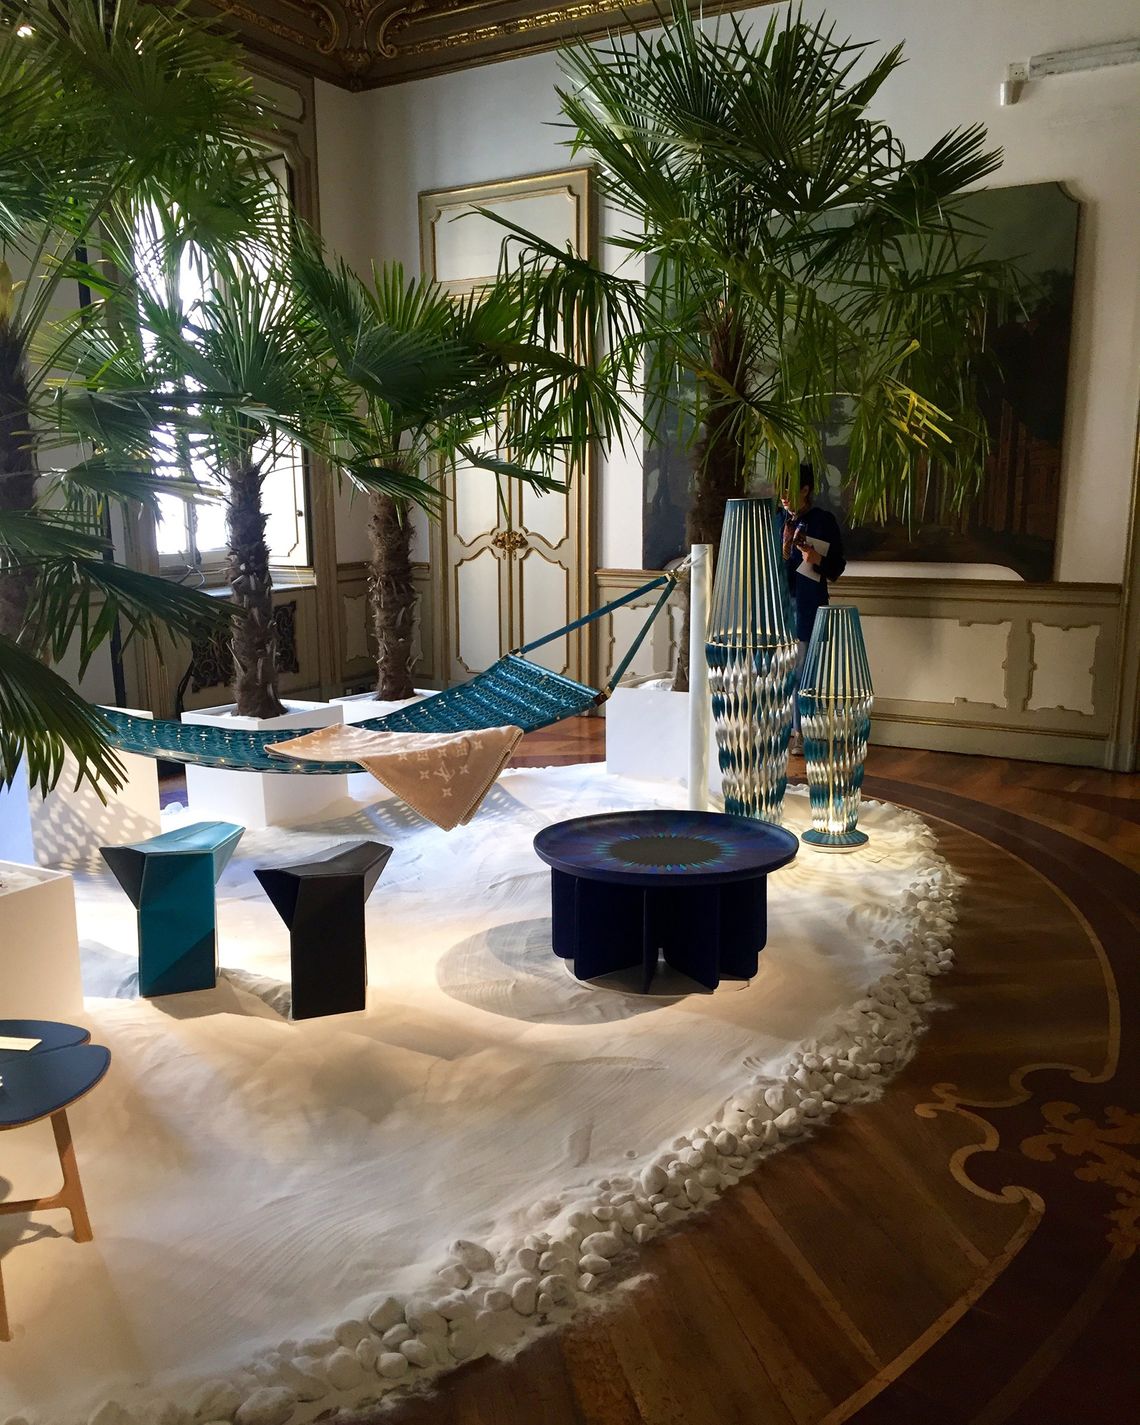 This Milan Design Week is going to be luxurious, grand, surreal